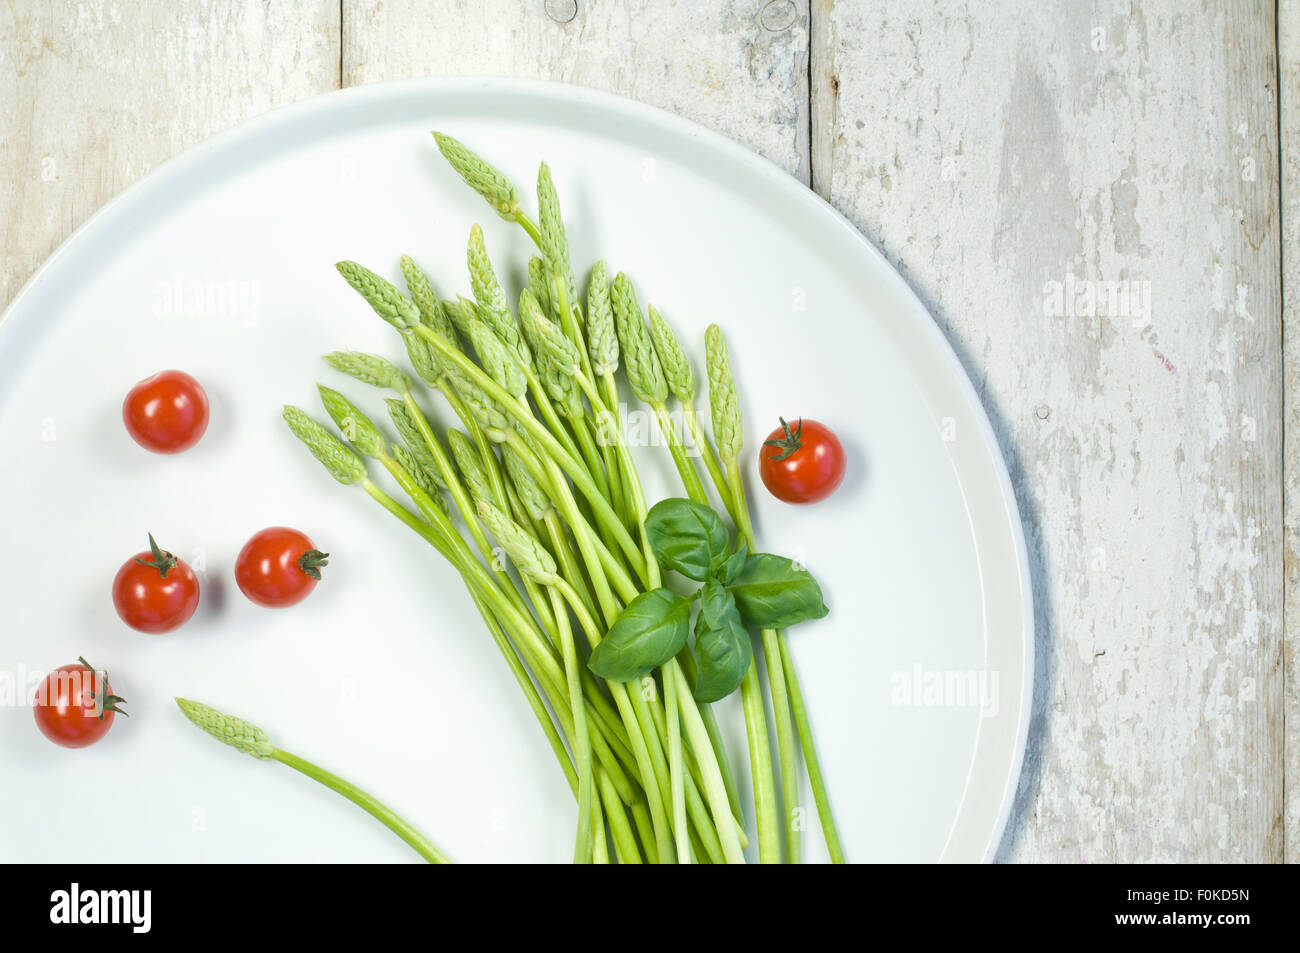 Wild asparagus on plate, tomatoes and basil Stock Photo